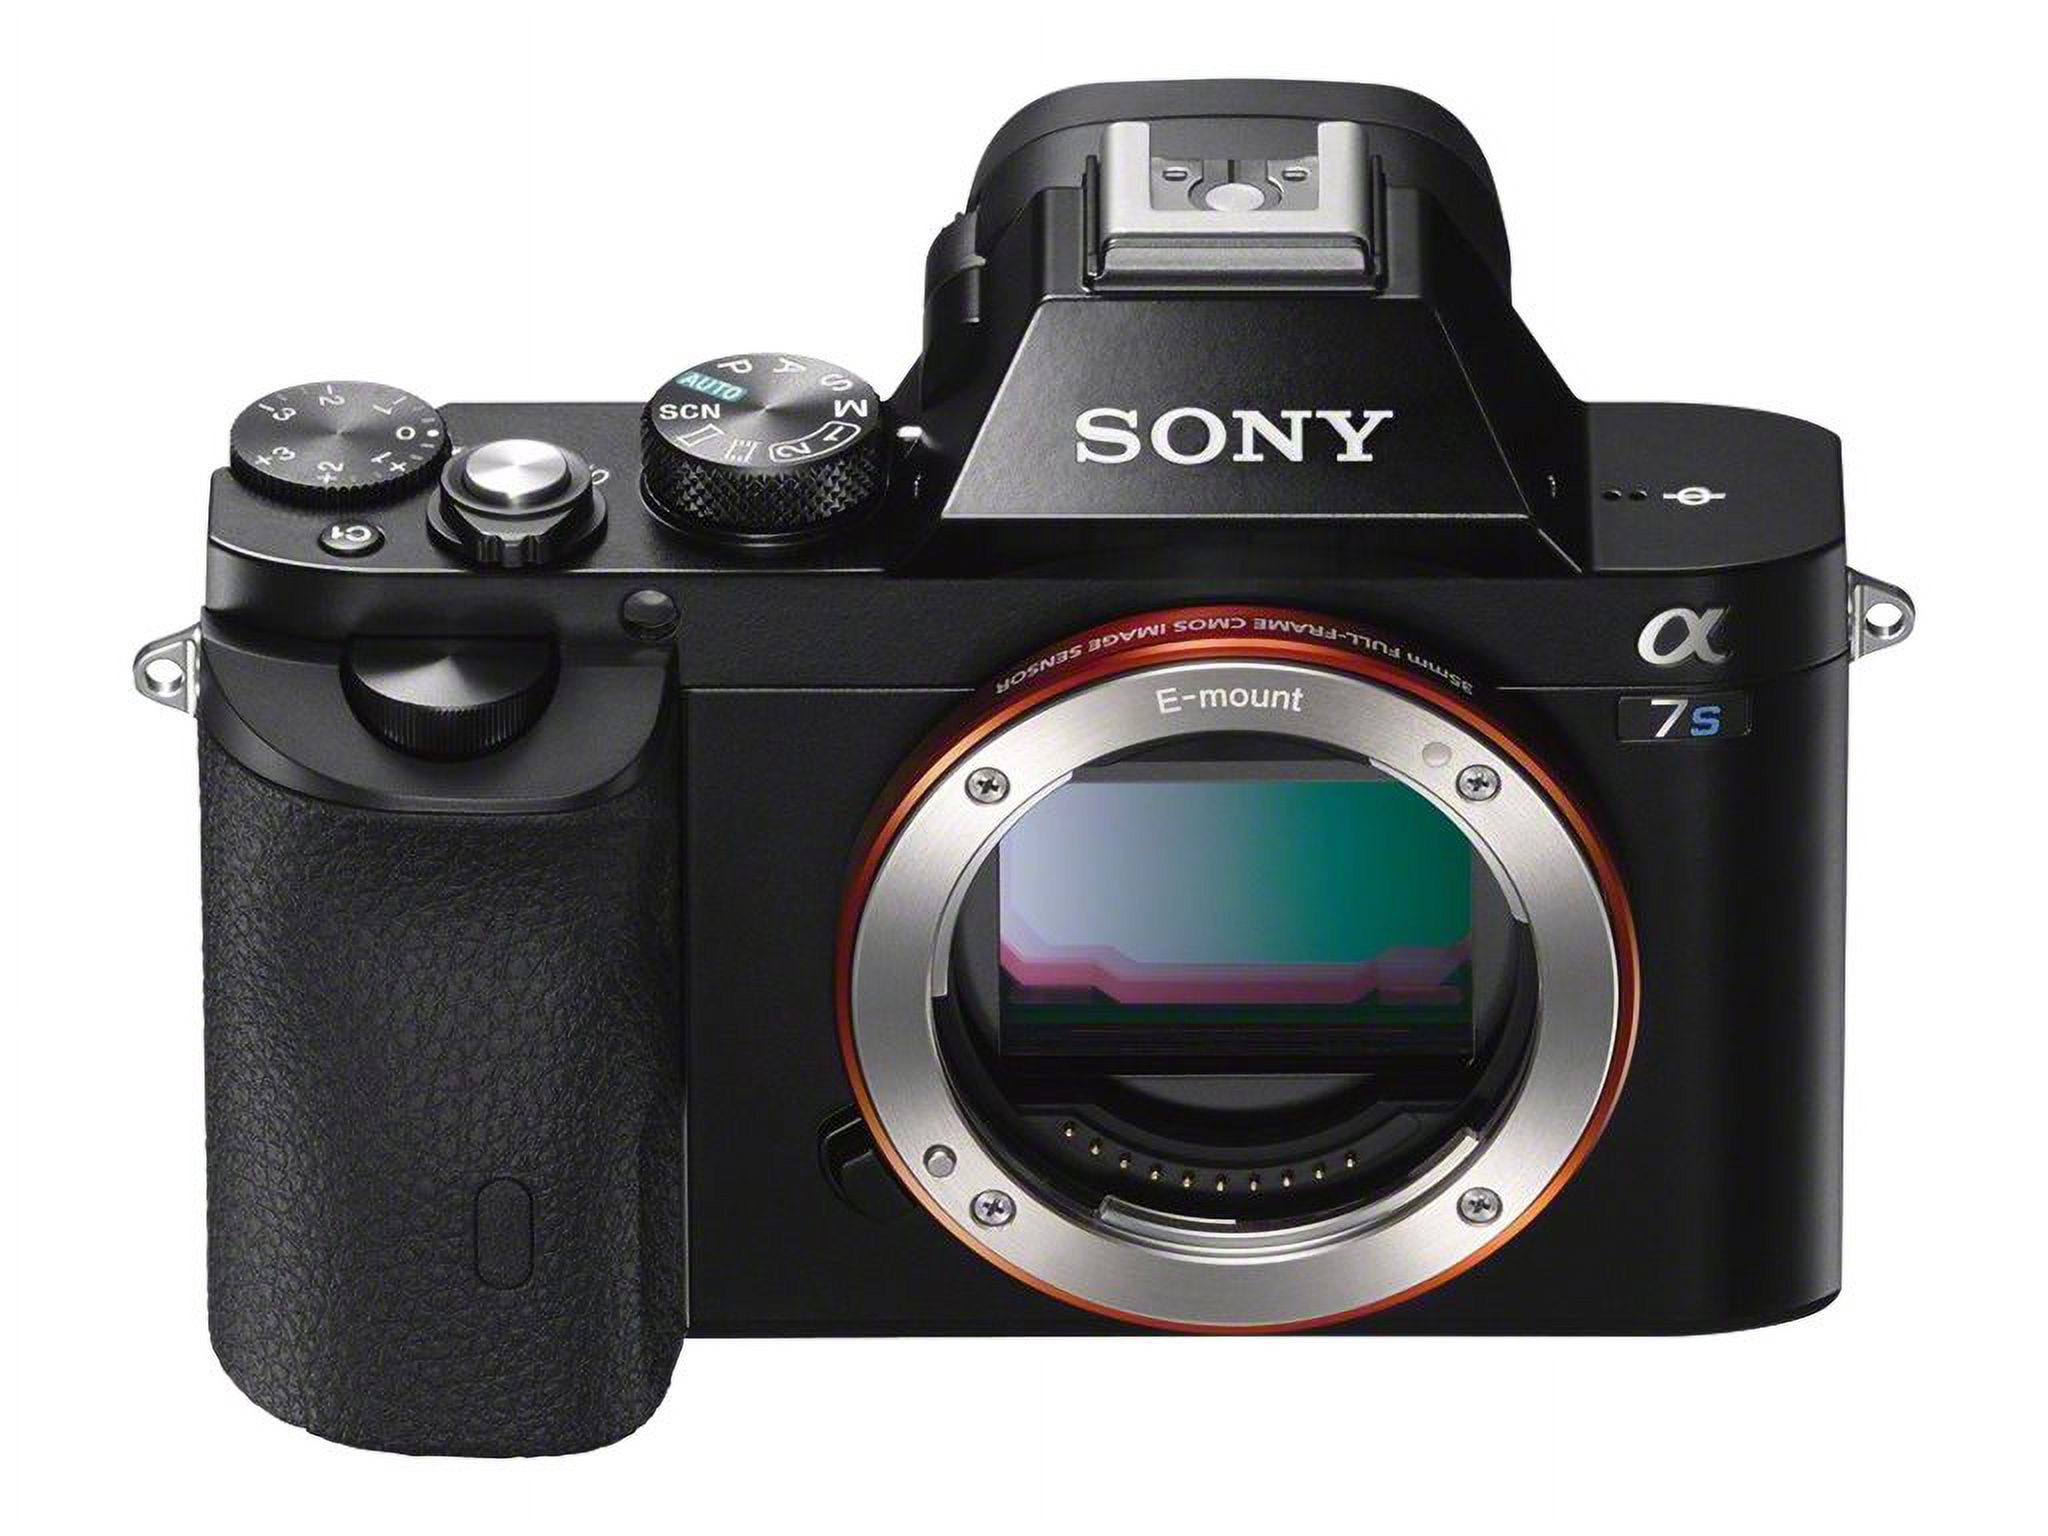 Sony a7s ILCE-7S - Digital camera - mirrorless - 12.2 MP - Full Frame - 1080p / 60 fps - body only - Wireless LAN, NFC - black - image 5 of 15